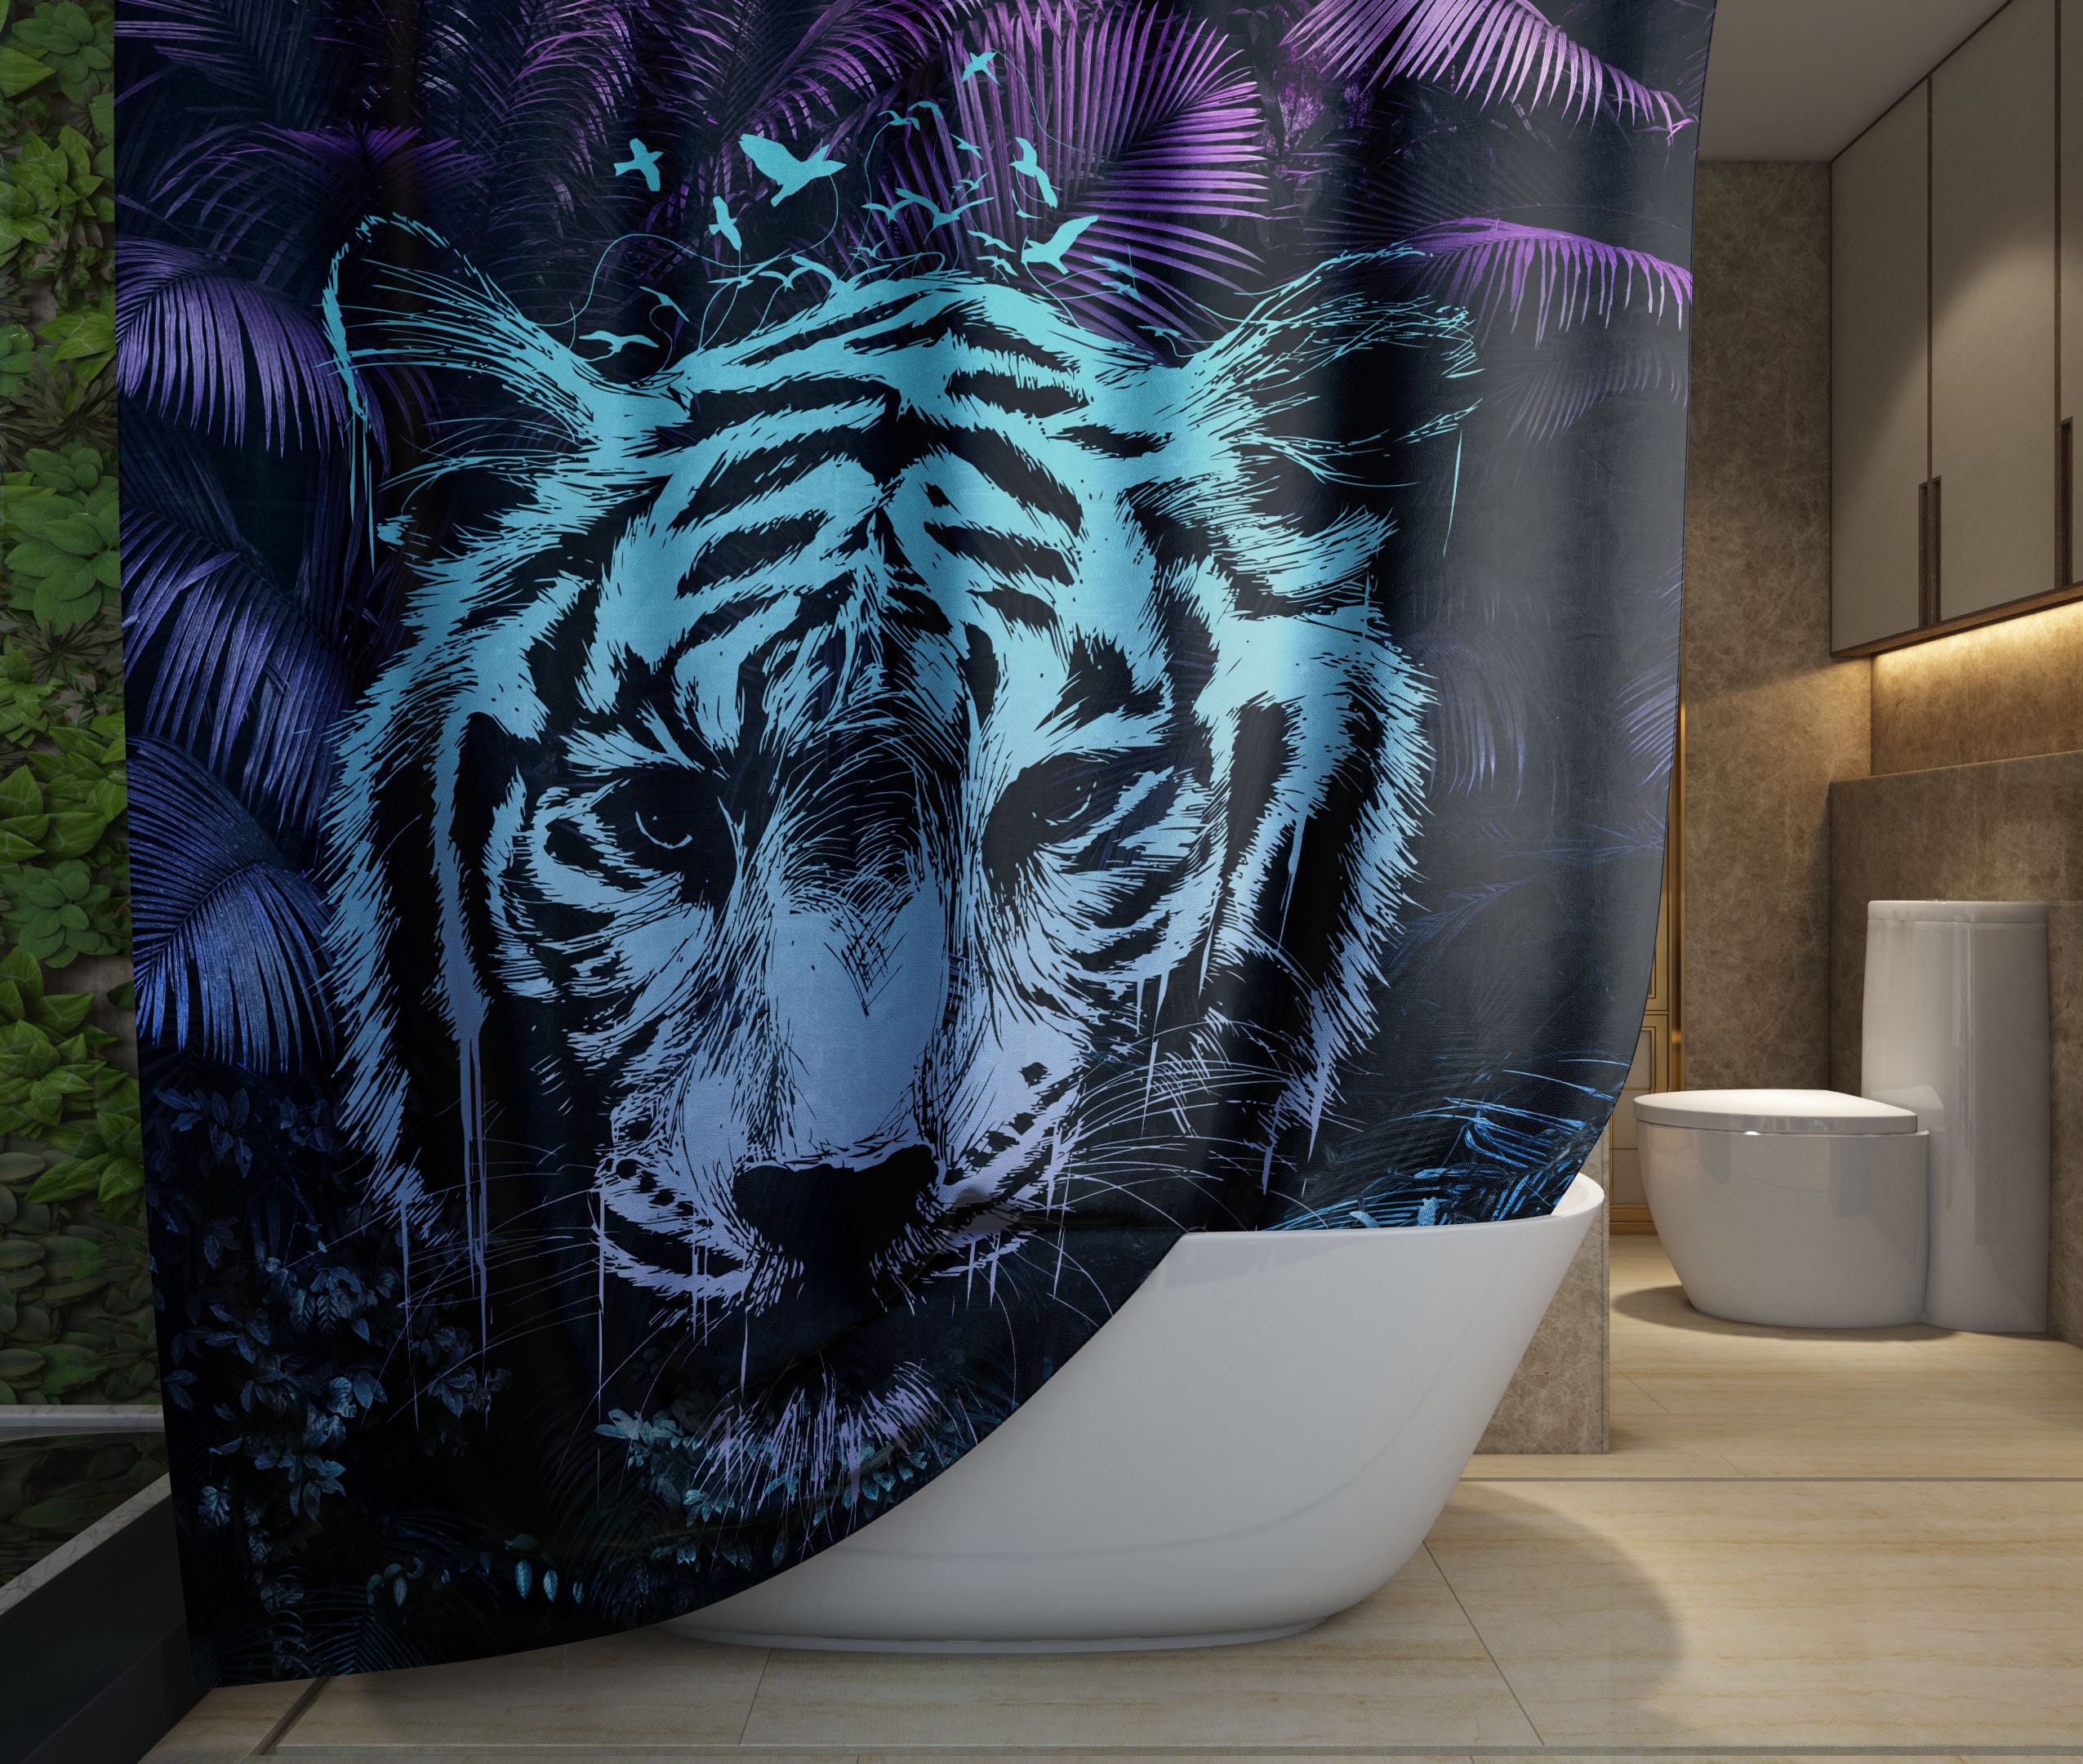 Tiger in Jungle Shower Certain. Jungle Theme Bathroom Decor. Bright Colors,  Teal, Purple, Green Color Abstract Modern Shower Curtain. SC1001 